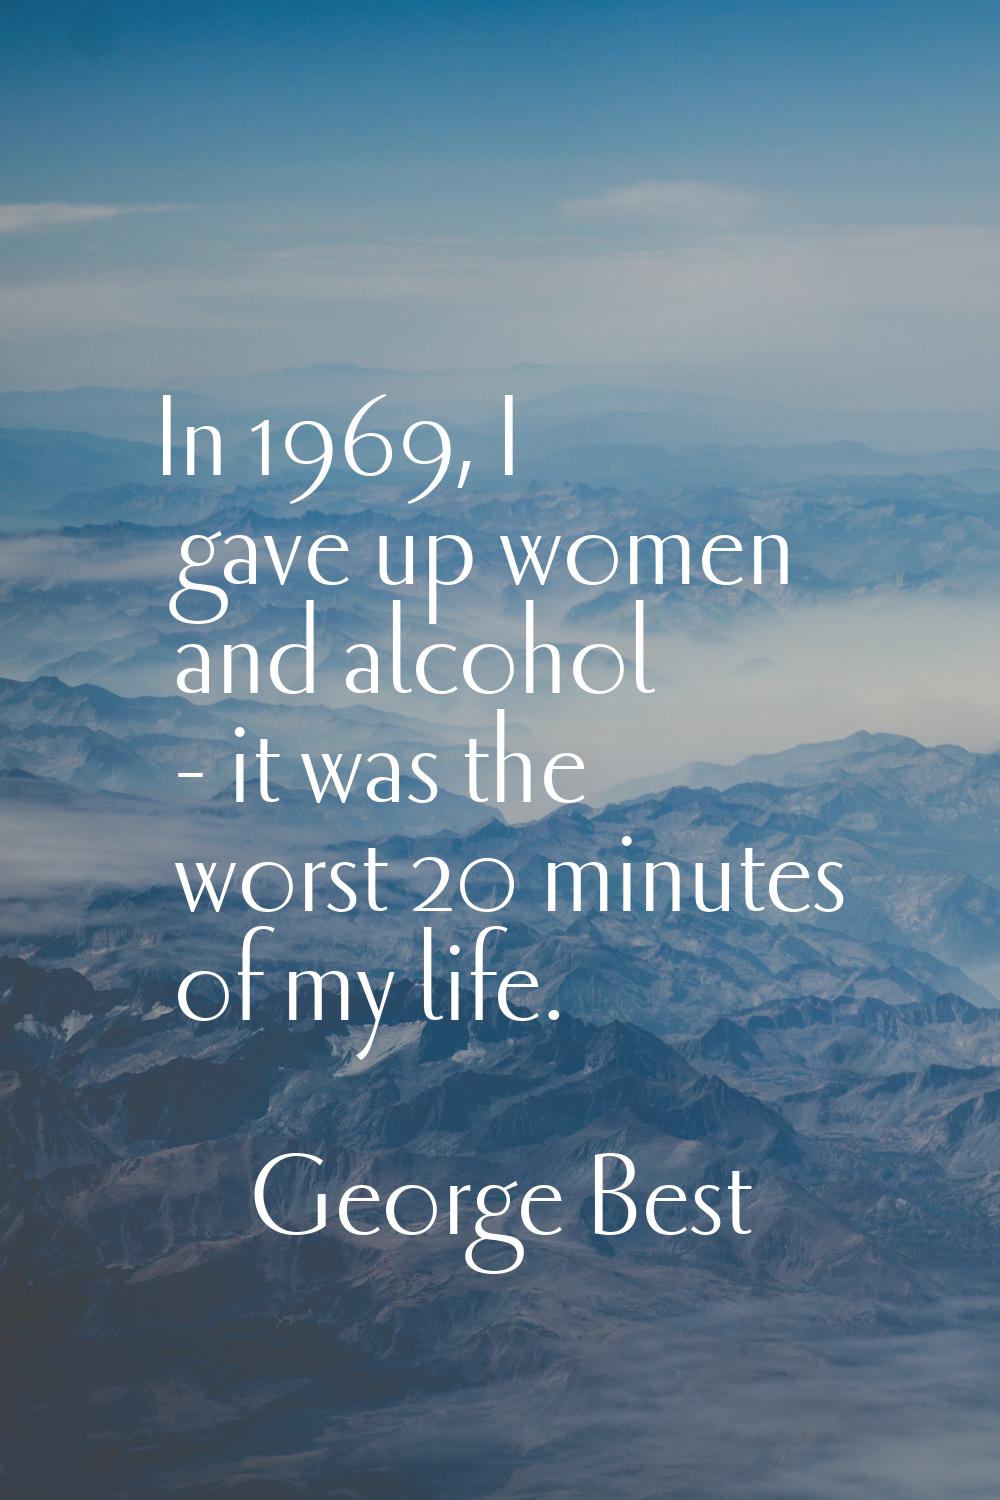 In 1969, I gave up women and alcohol - it was the worst 20 minutes of my life.